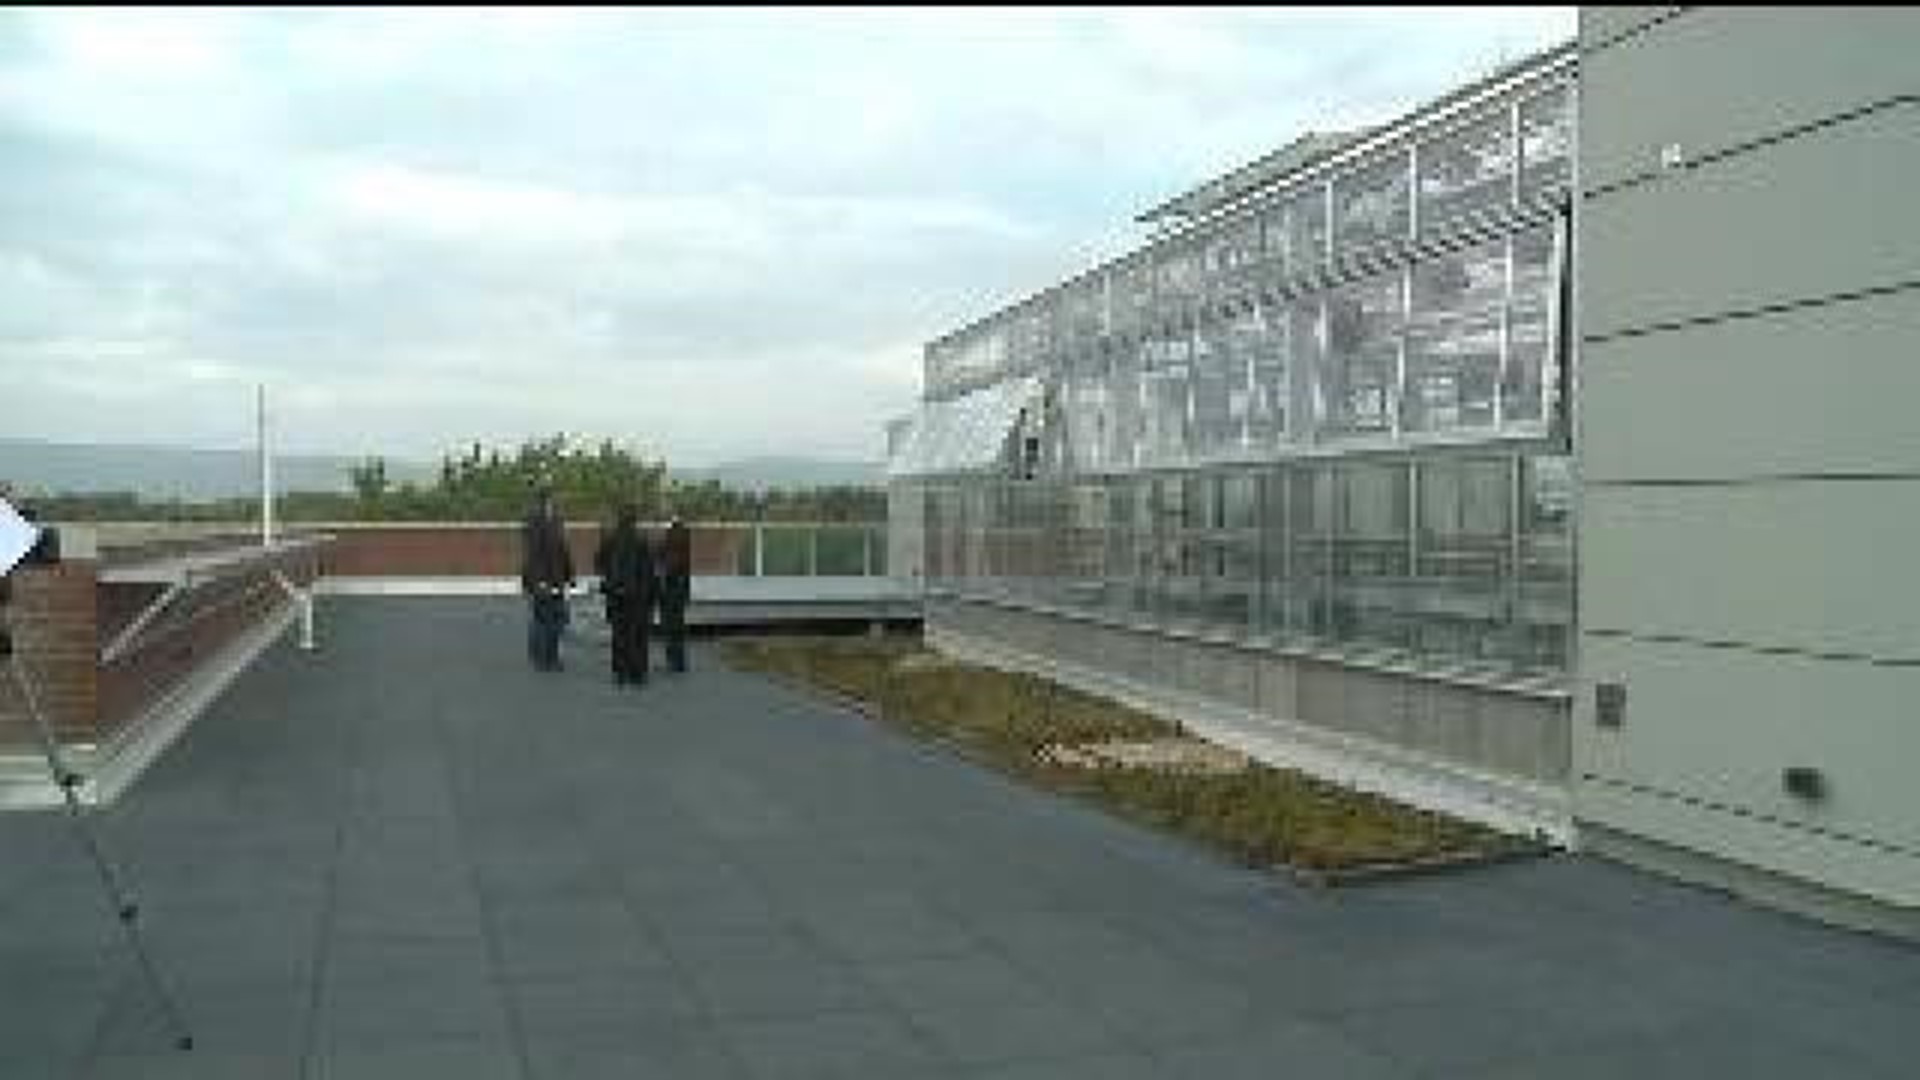 A look inside Wilkes' New Science Center